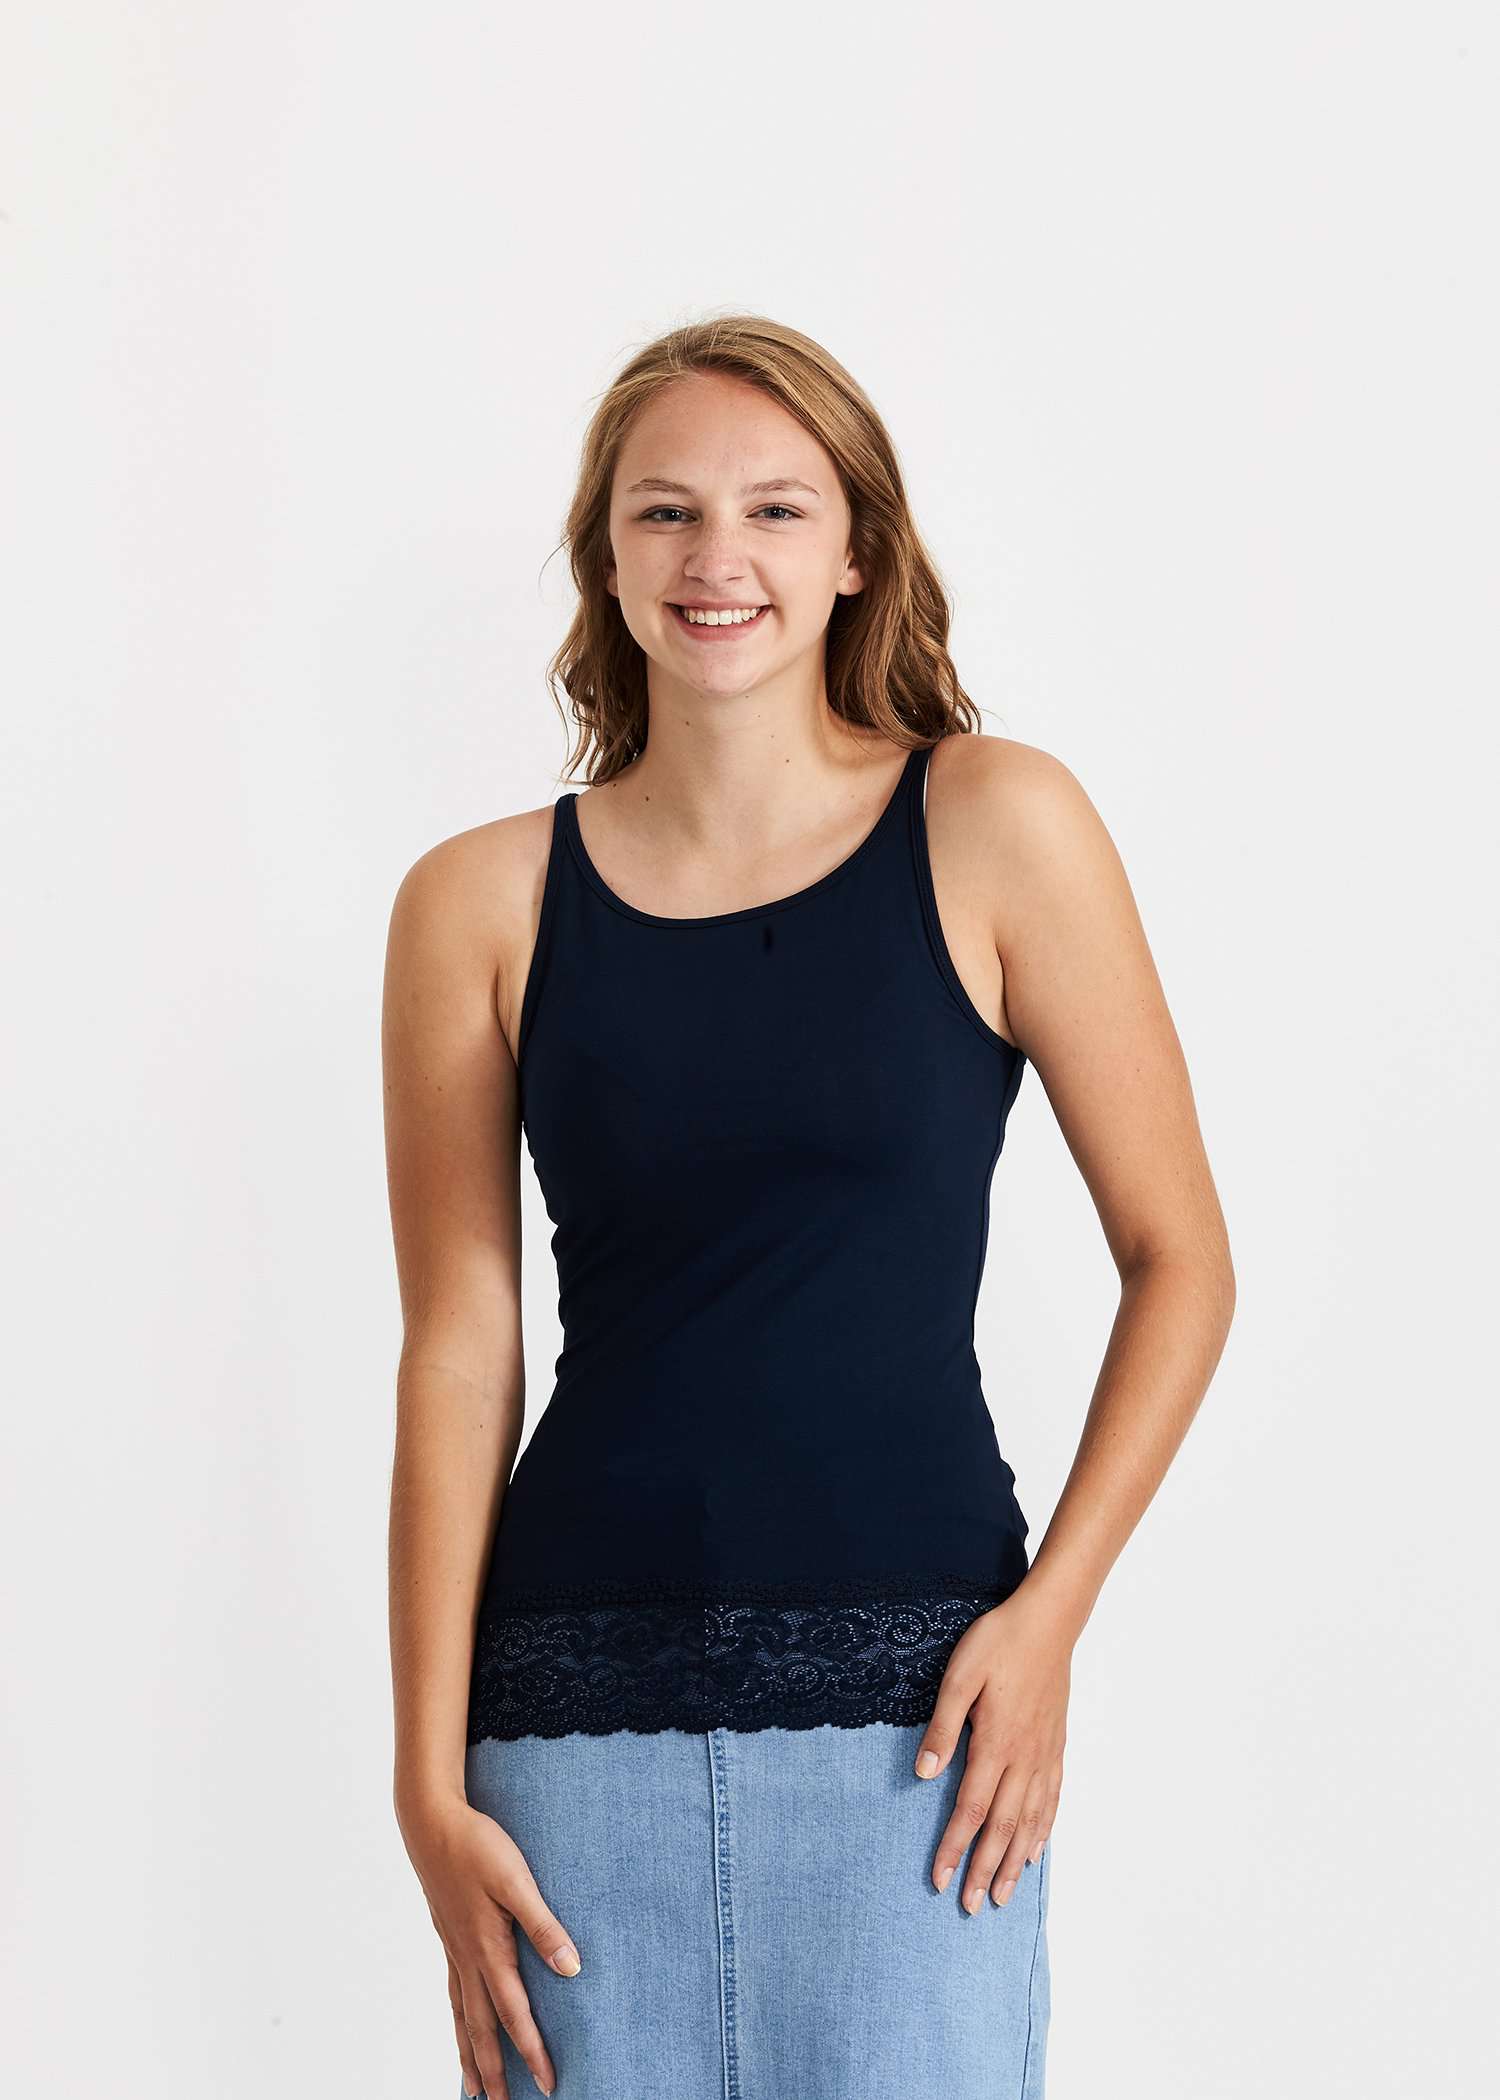 Reversible modest layering cami with lace at the bottom in white, black or navy color options.